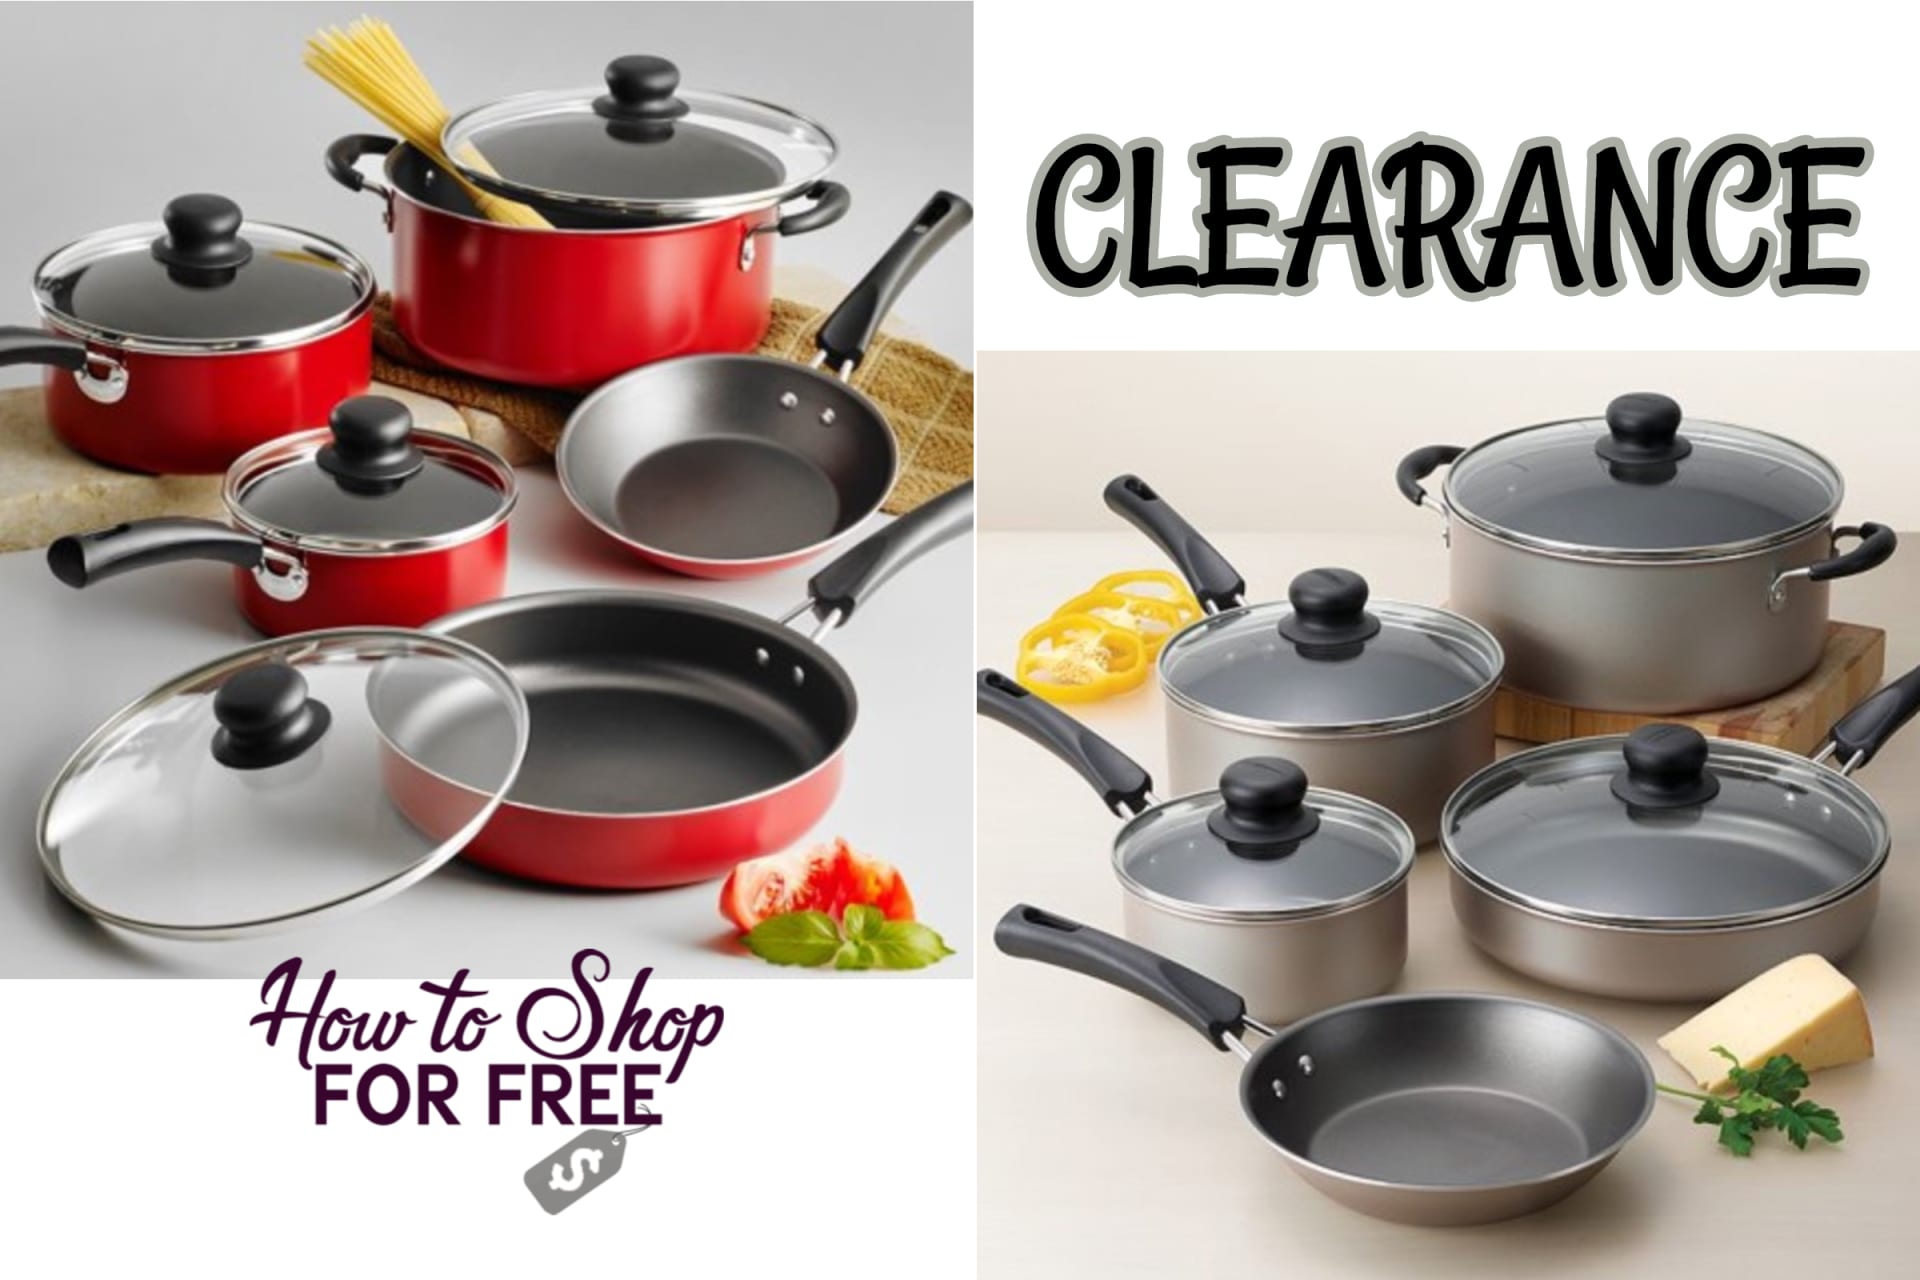  Cookware Clearance